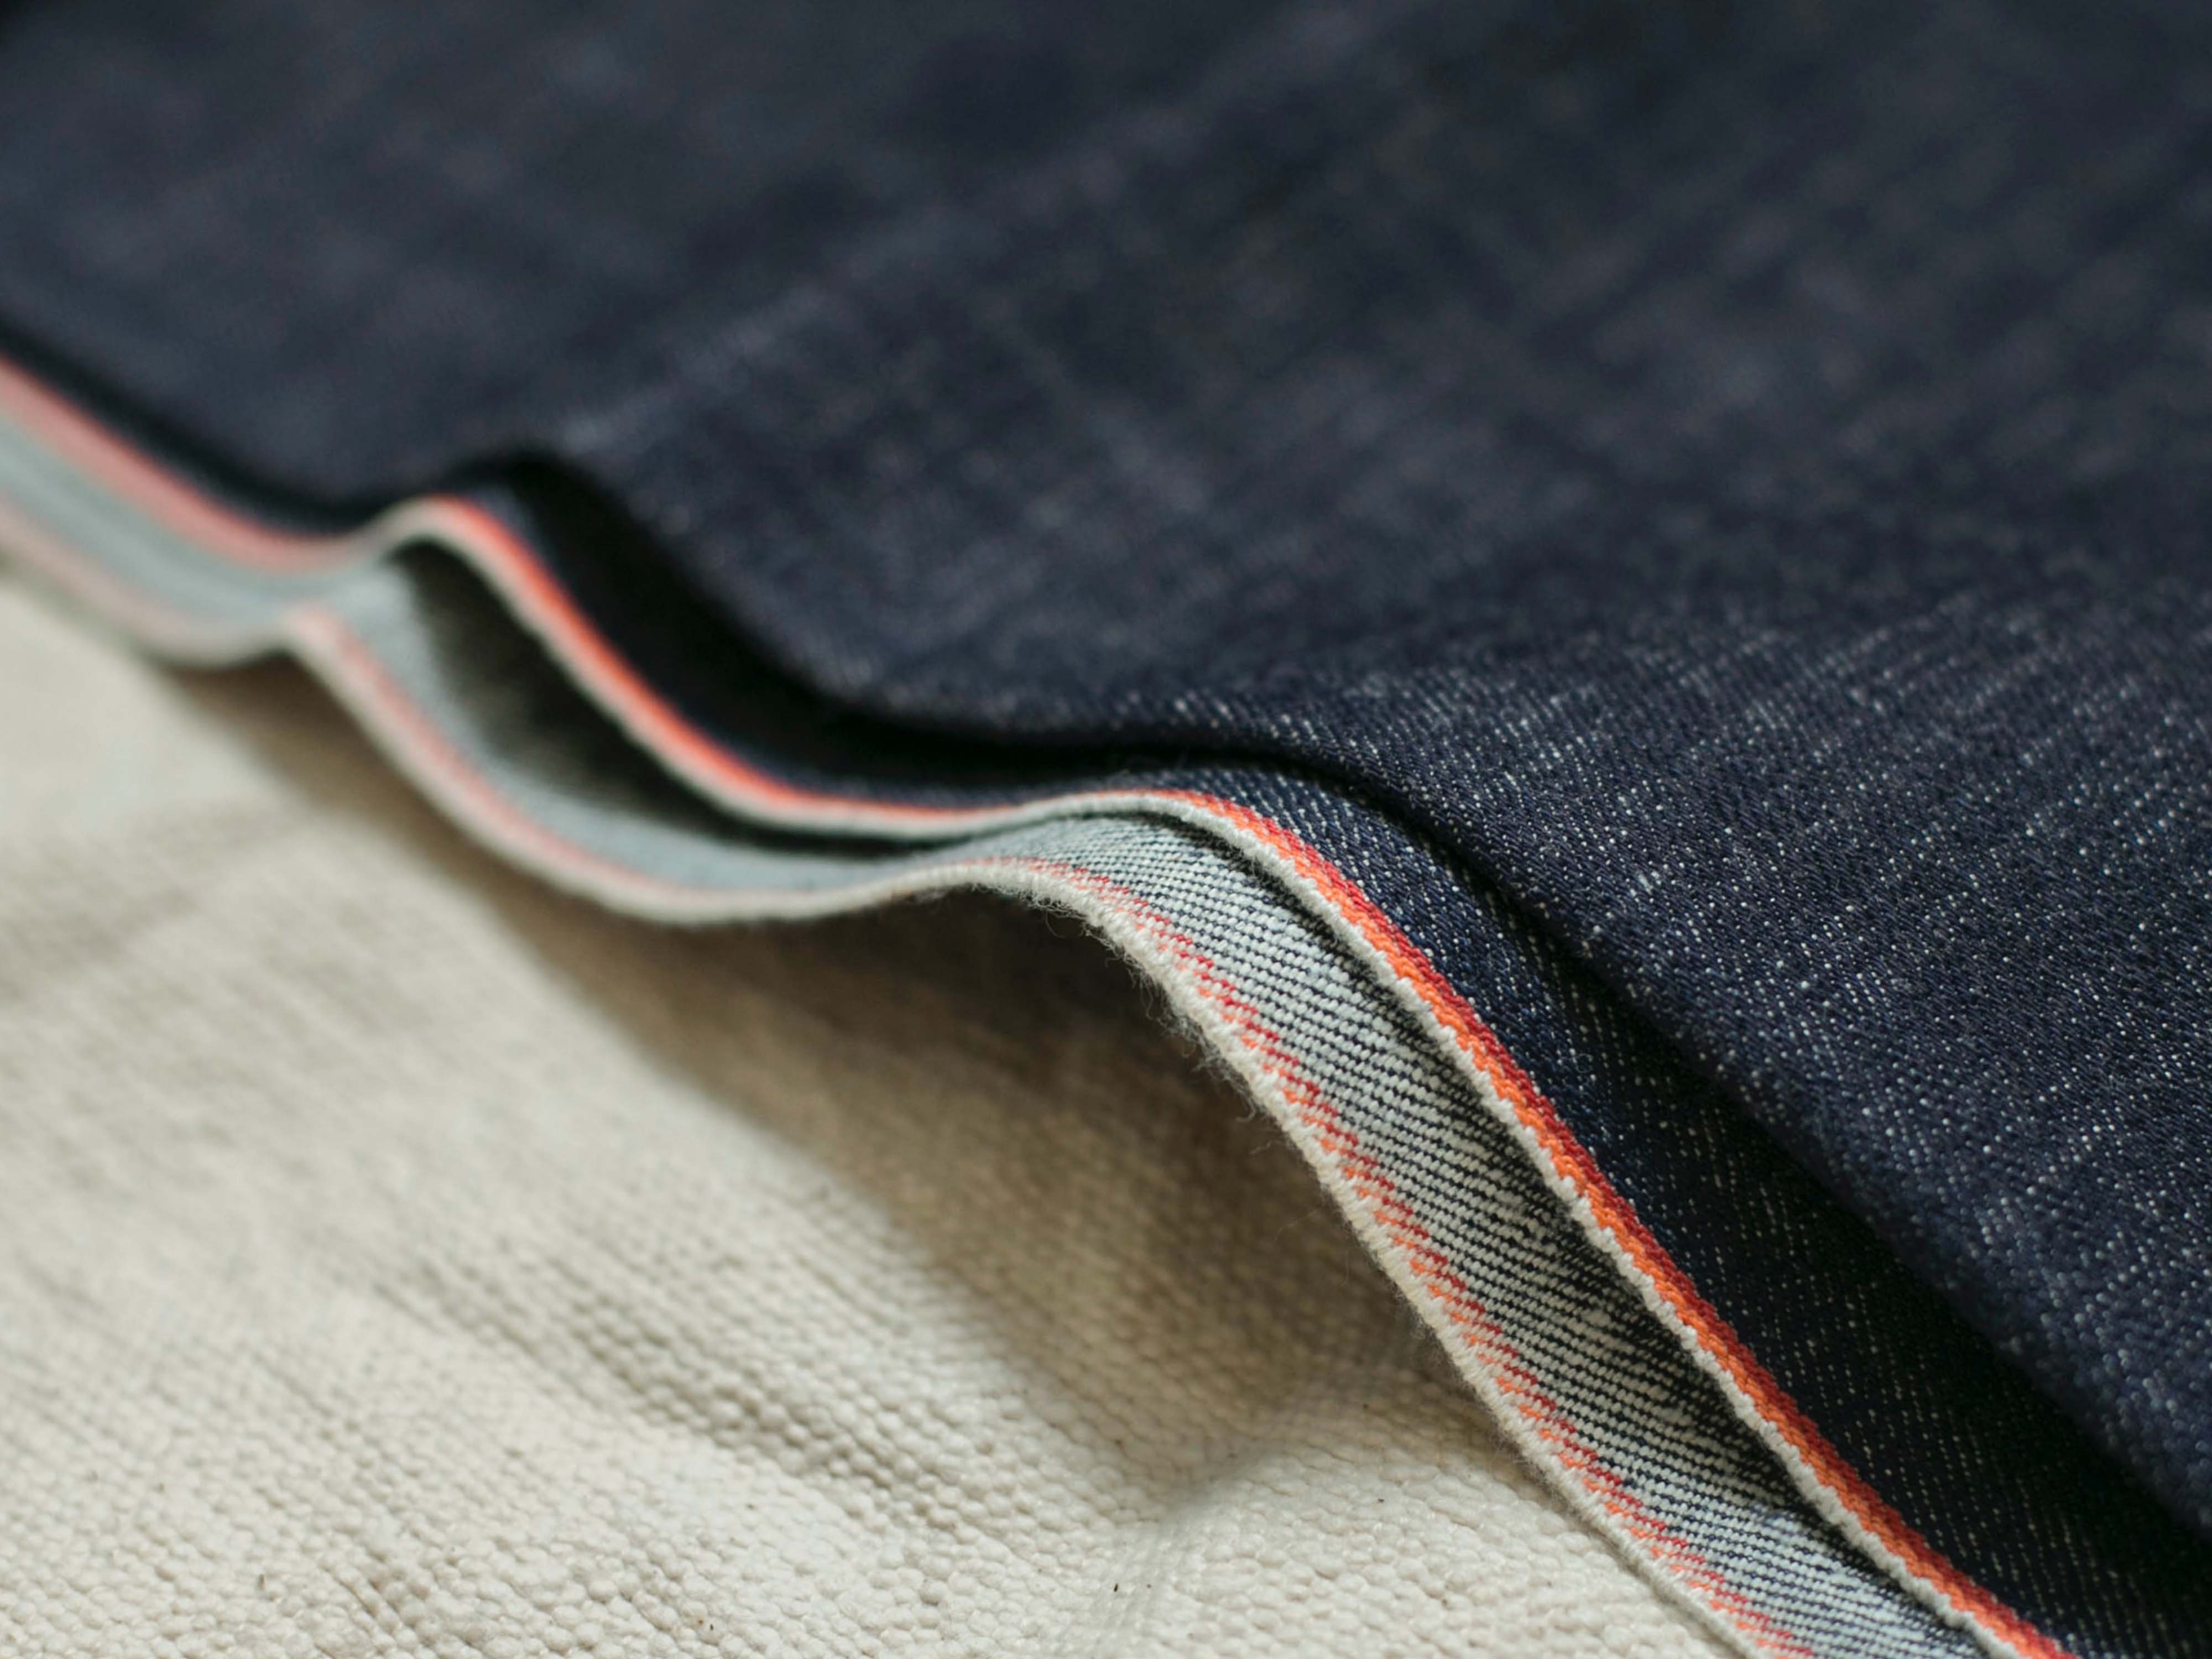 International trade in denim fabric and jeans